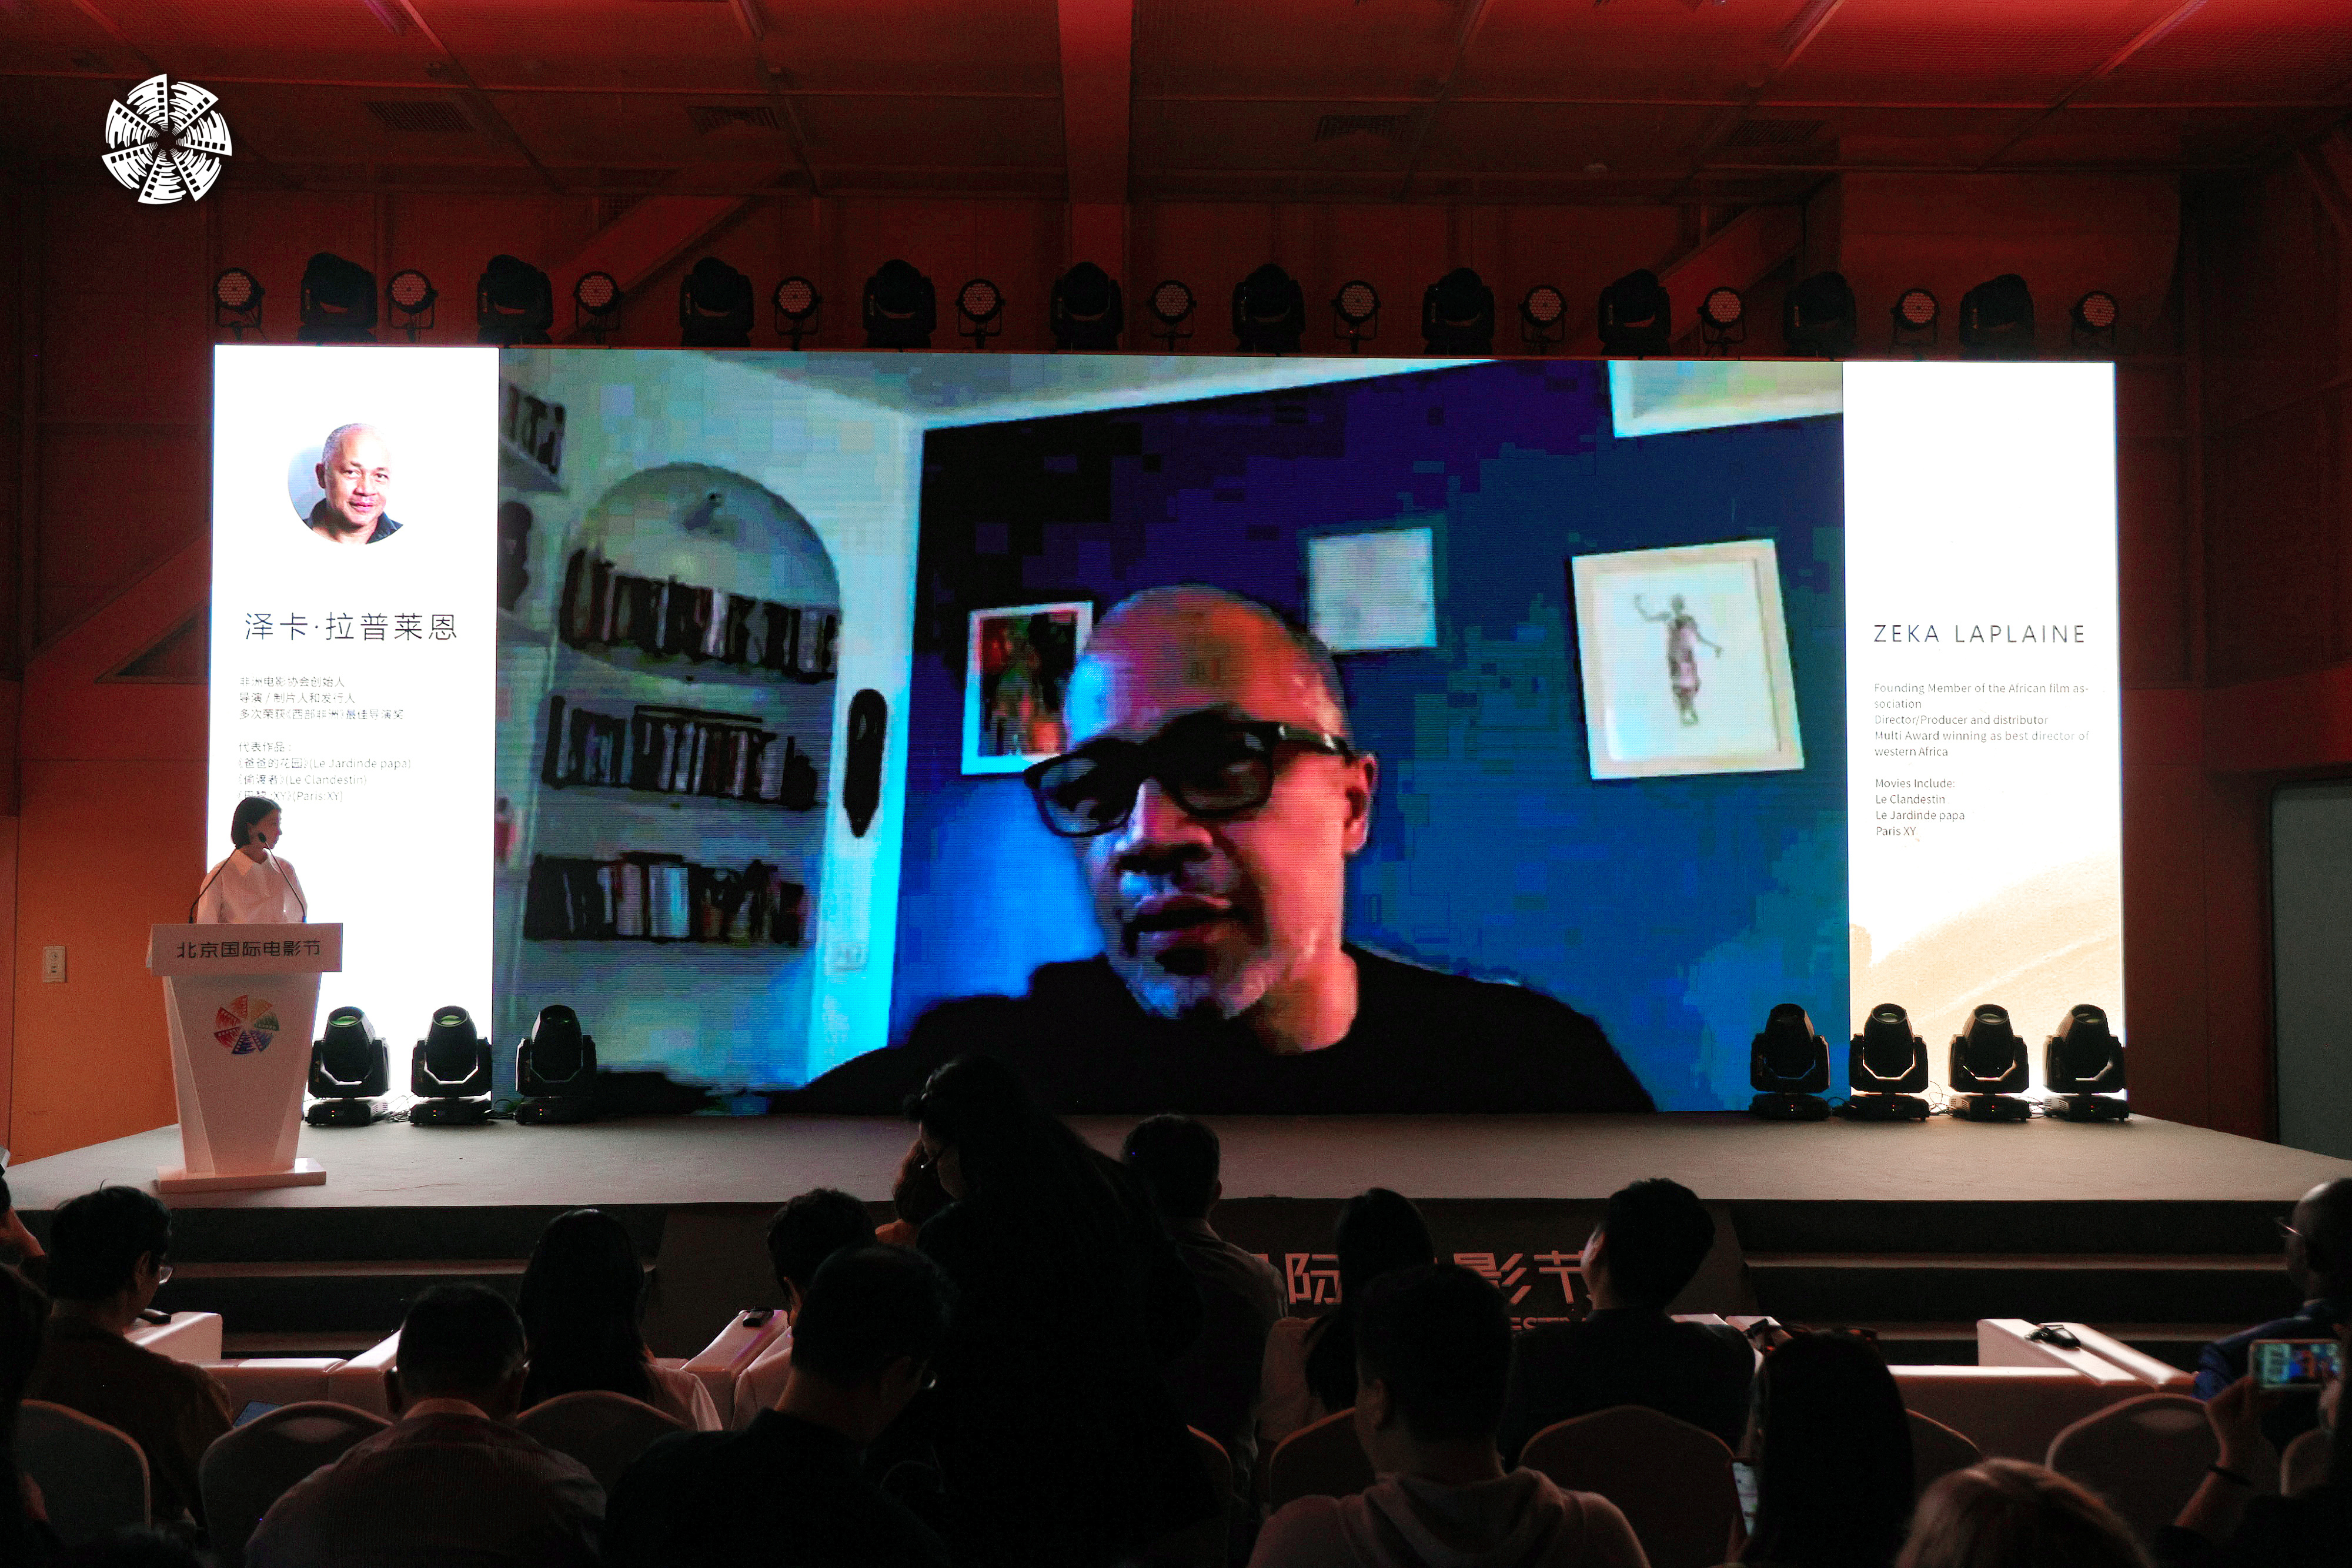 Democratic Republic of Congo-born filmmaker Zeka Laplaine appears in a video message to the attendees of the African Film Conference at the 14th Beijing International Film Festival in Beijing, April 22, 2024. /BJIFF